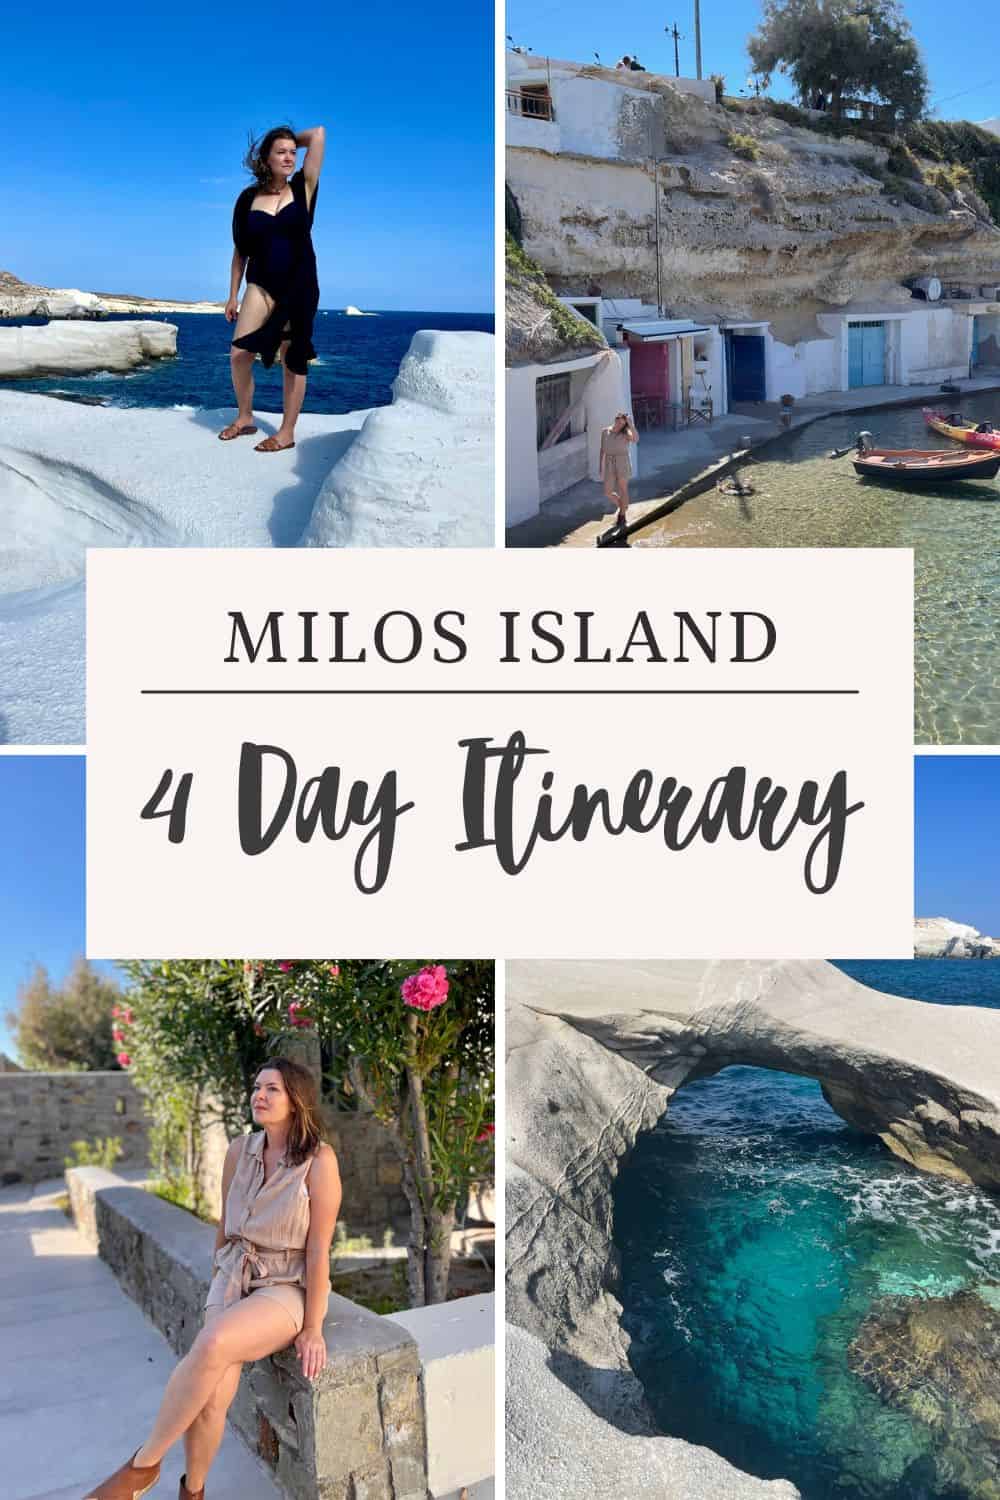 4 Day Itinerary for Milos